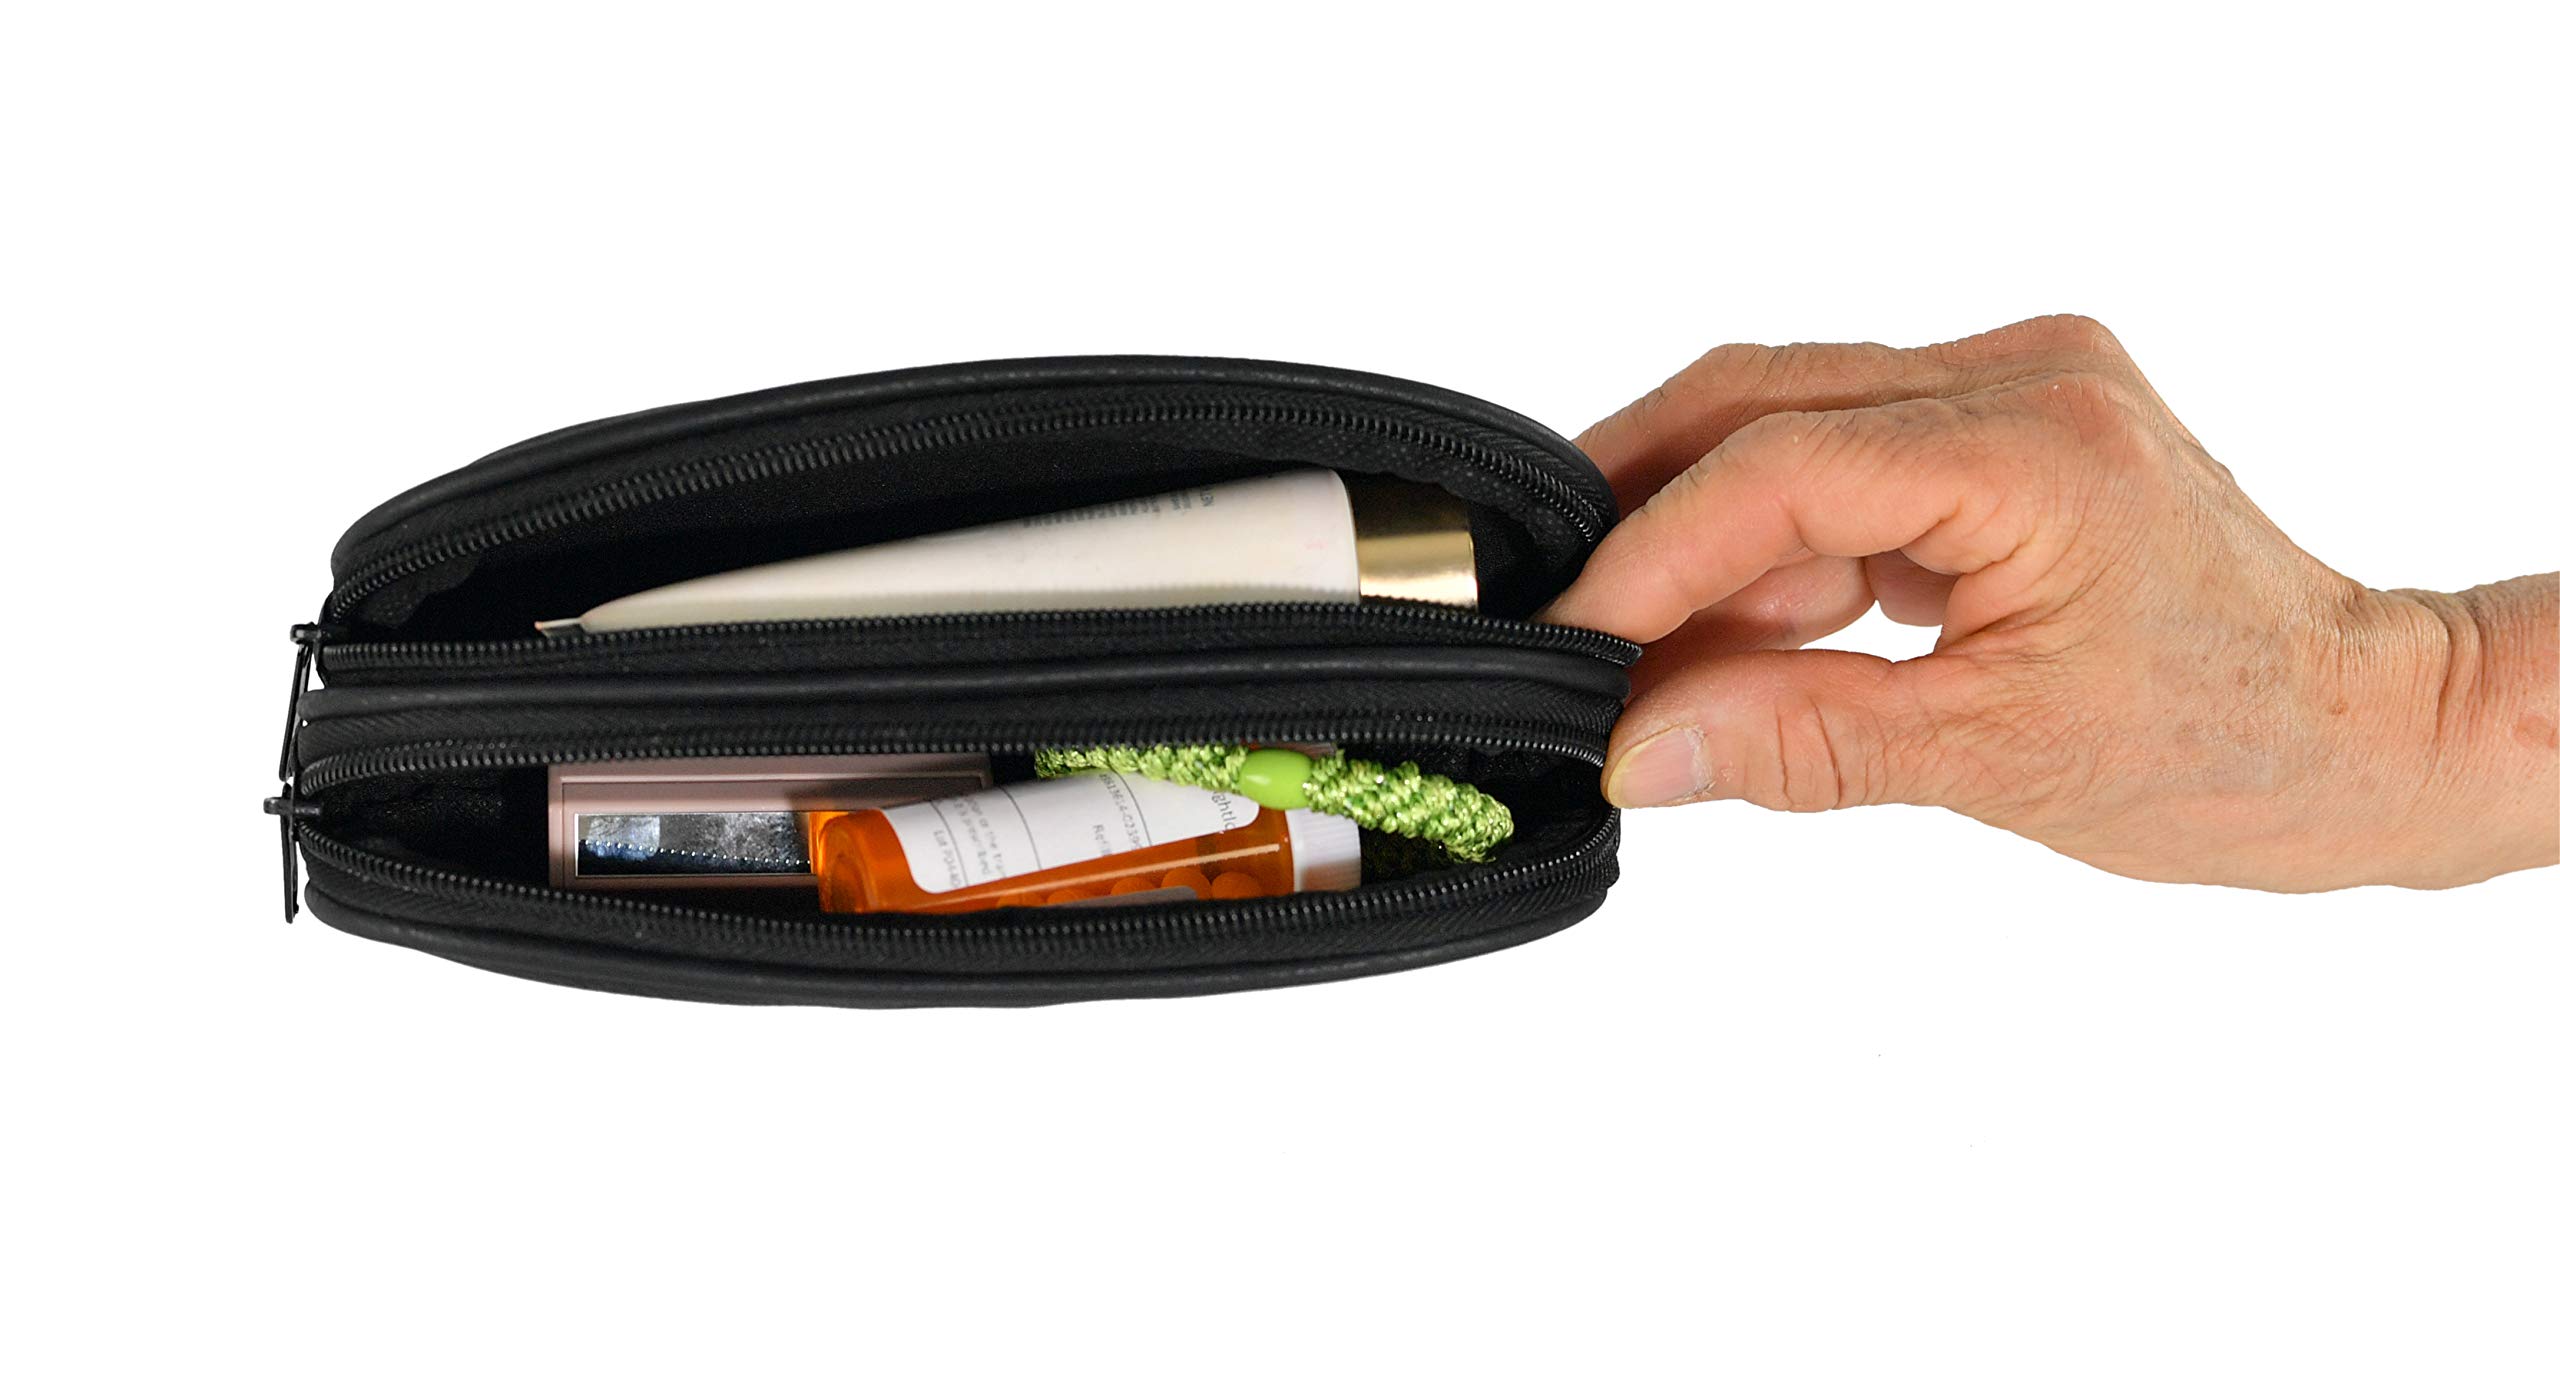 HOME-X Double Eyeglass Holder, Black Leather Pouch with 2 Compartments, Travel Bag, Toiletry Pack, Pencil Case